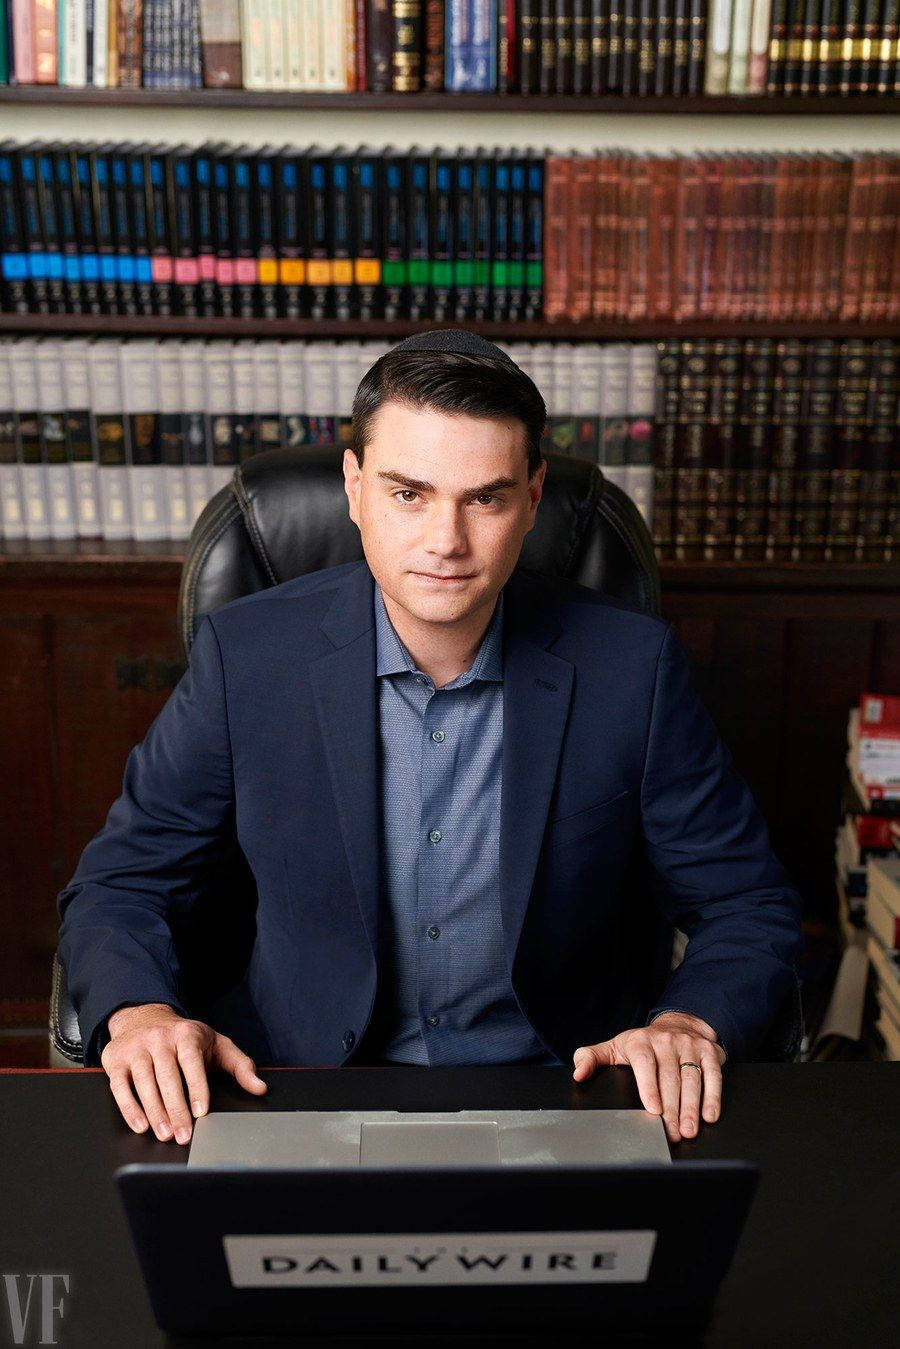 Ben Shapiro The Daily Wire Founder Background